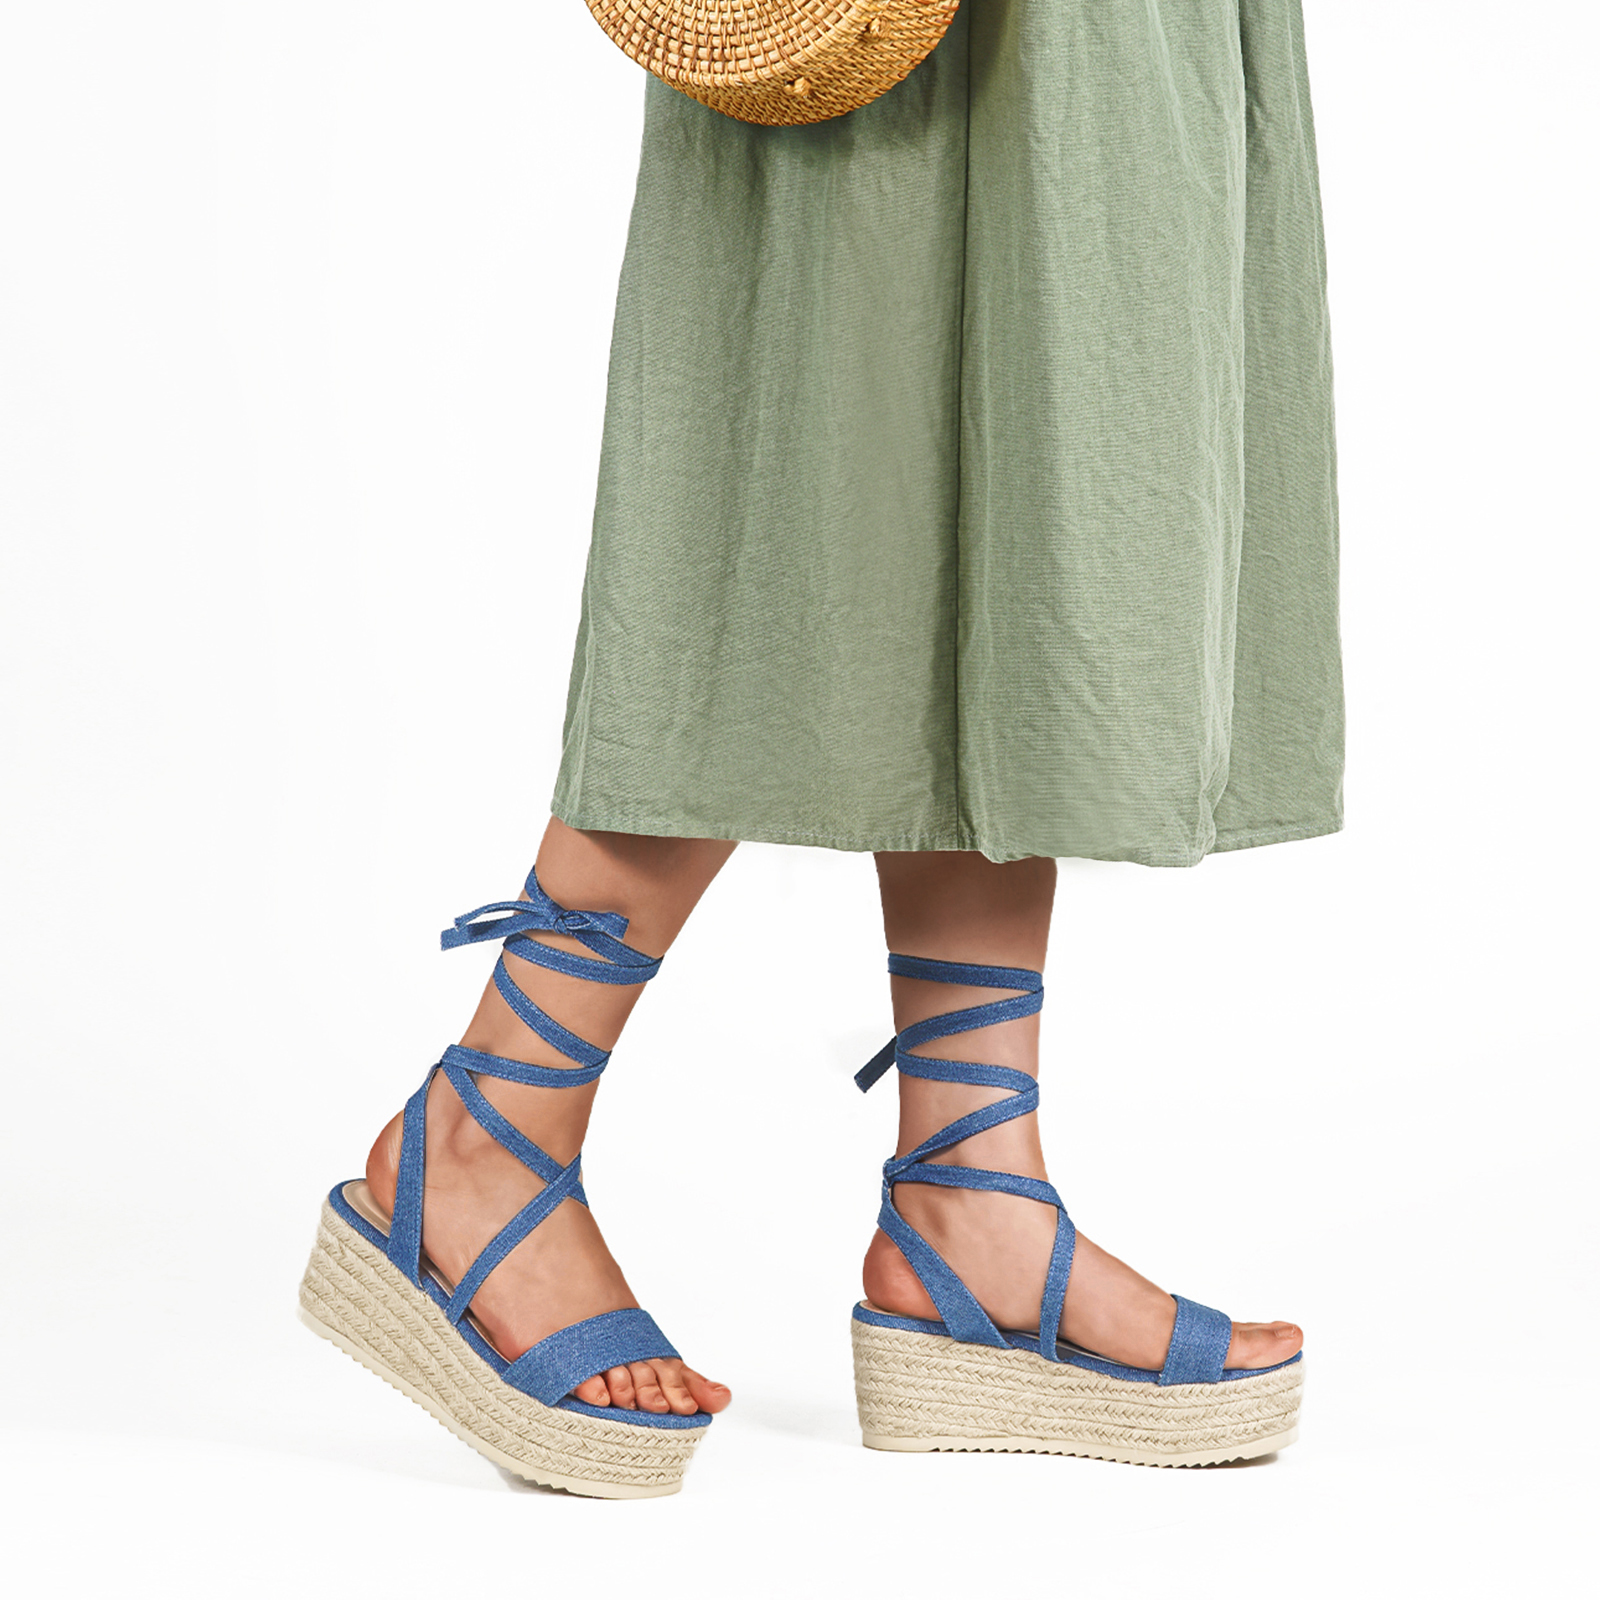 MUSSHOE Open Toe Espadrille Wedge Sandals with Strappy 